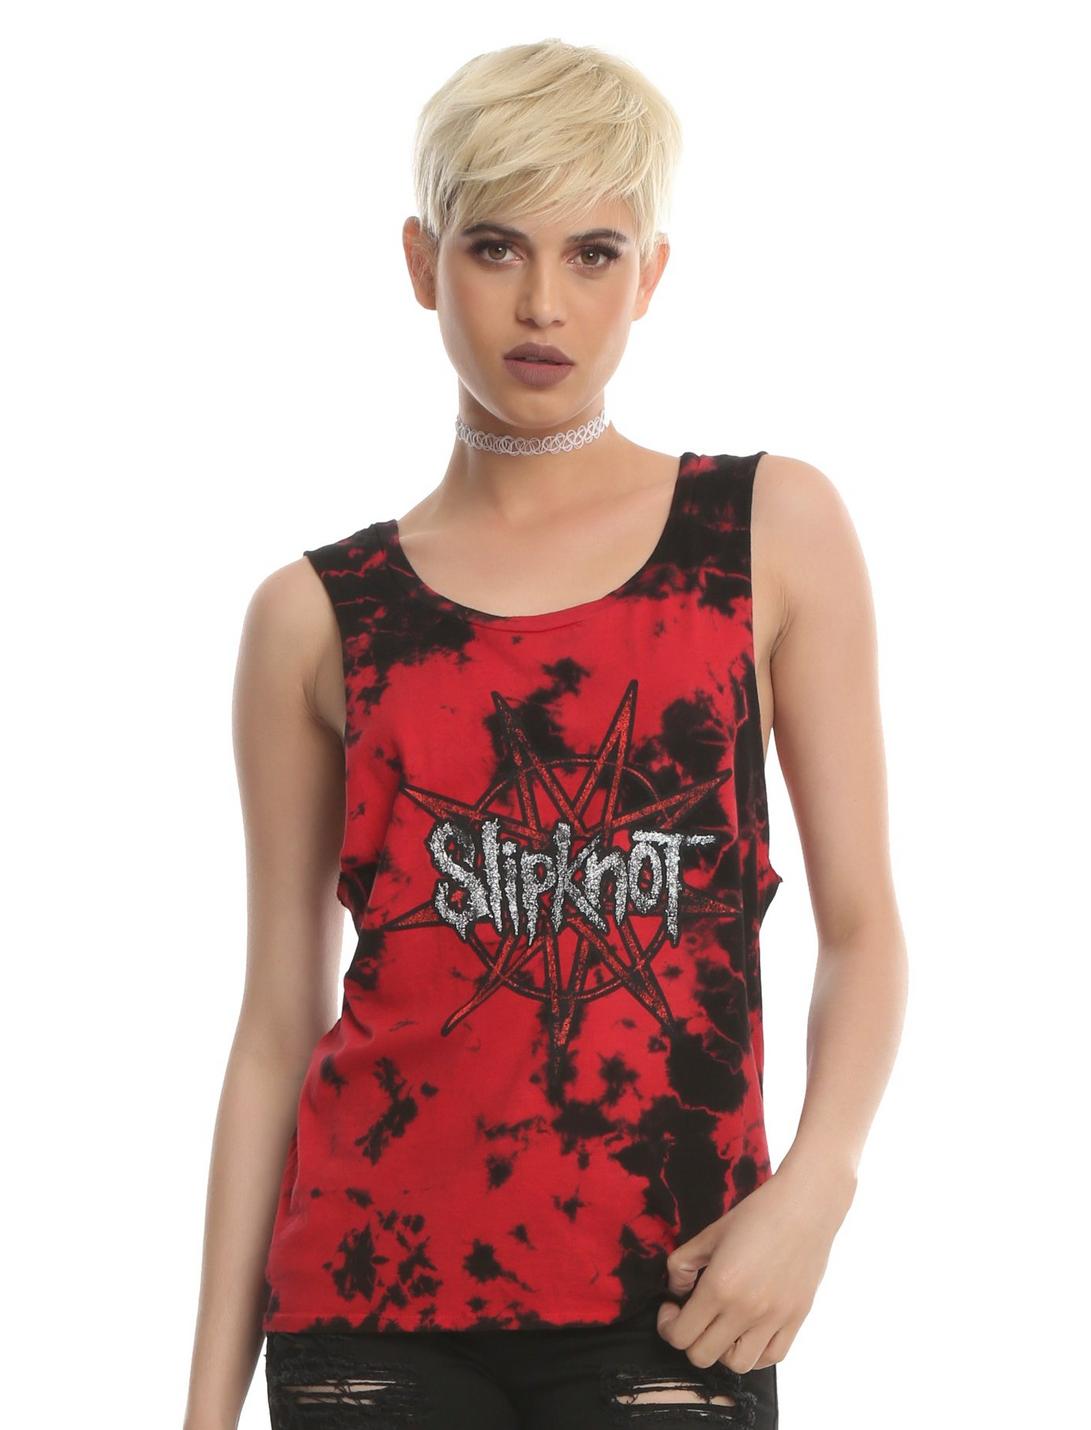 Red And Black Slipknot Logo Tie-Dye Girls Muscle Top, RED, hi-res